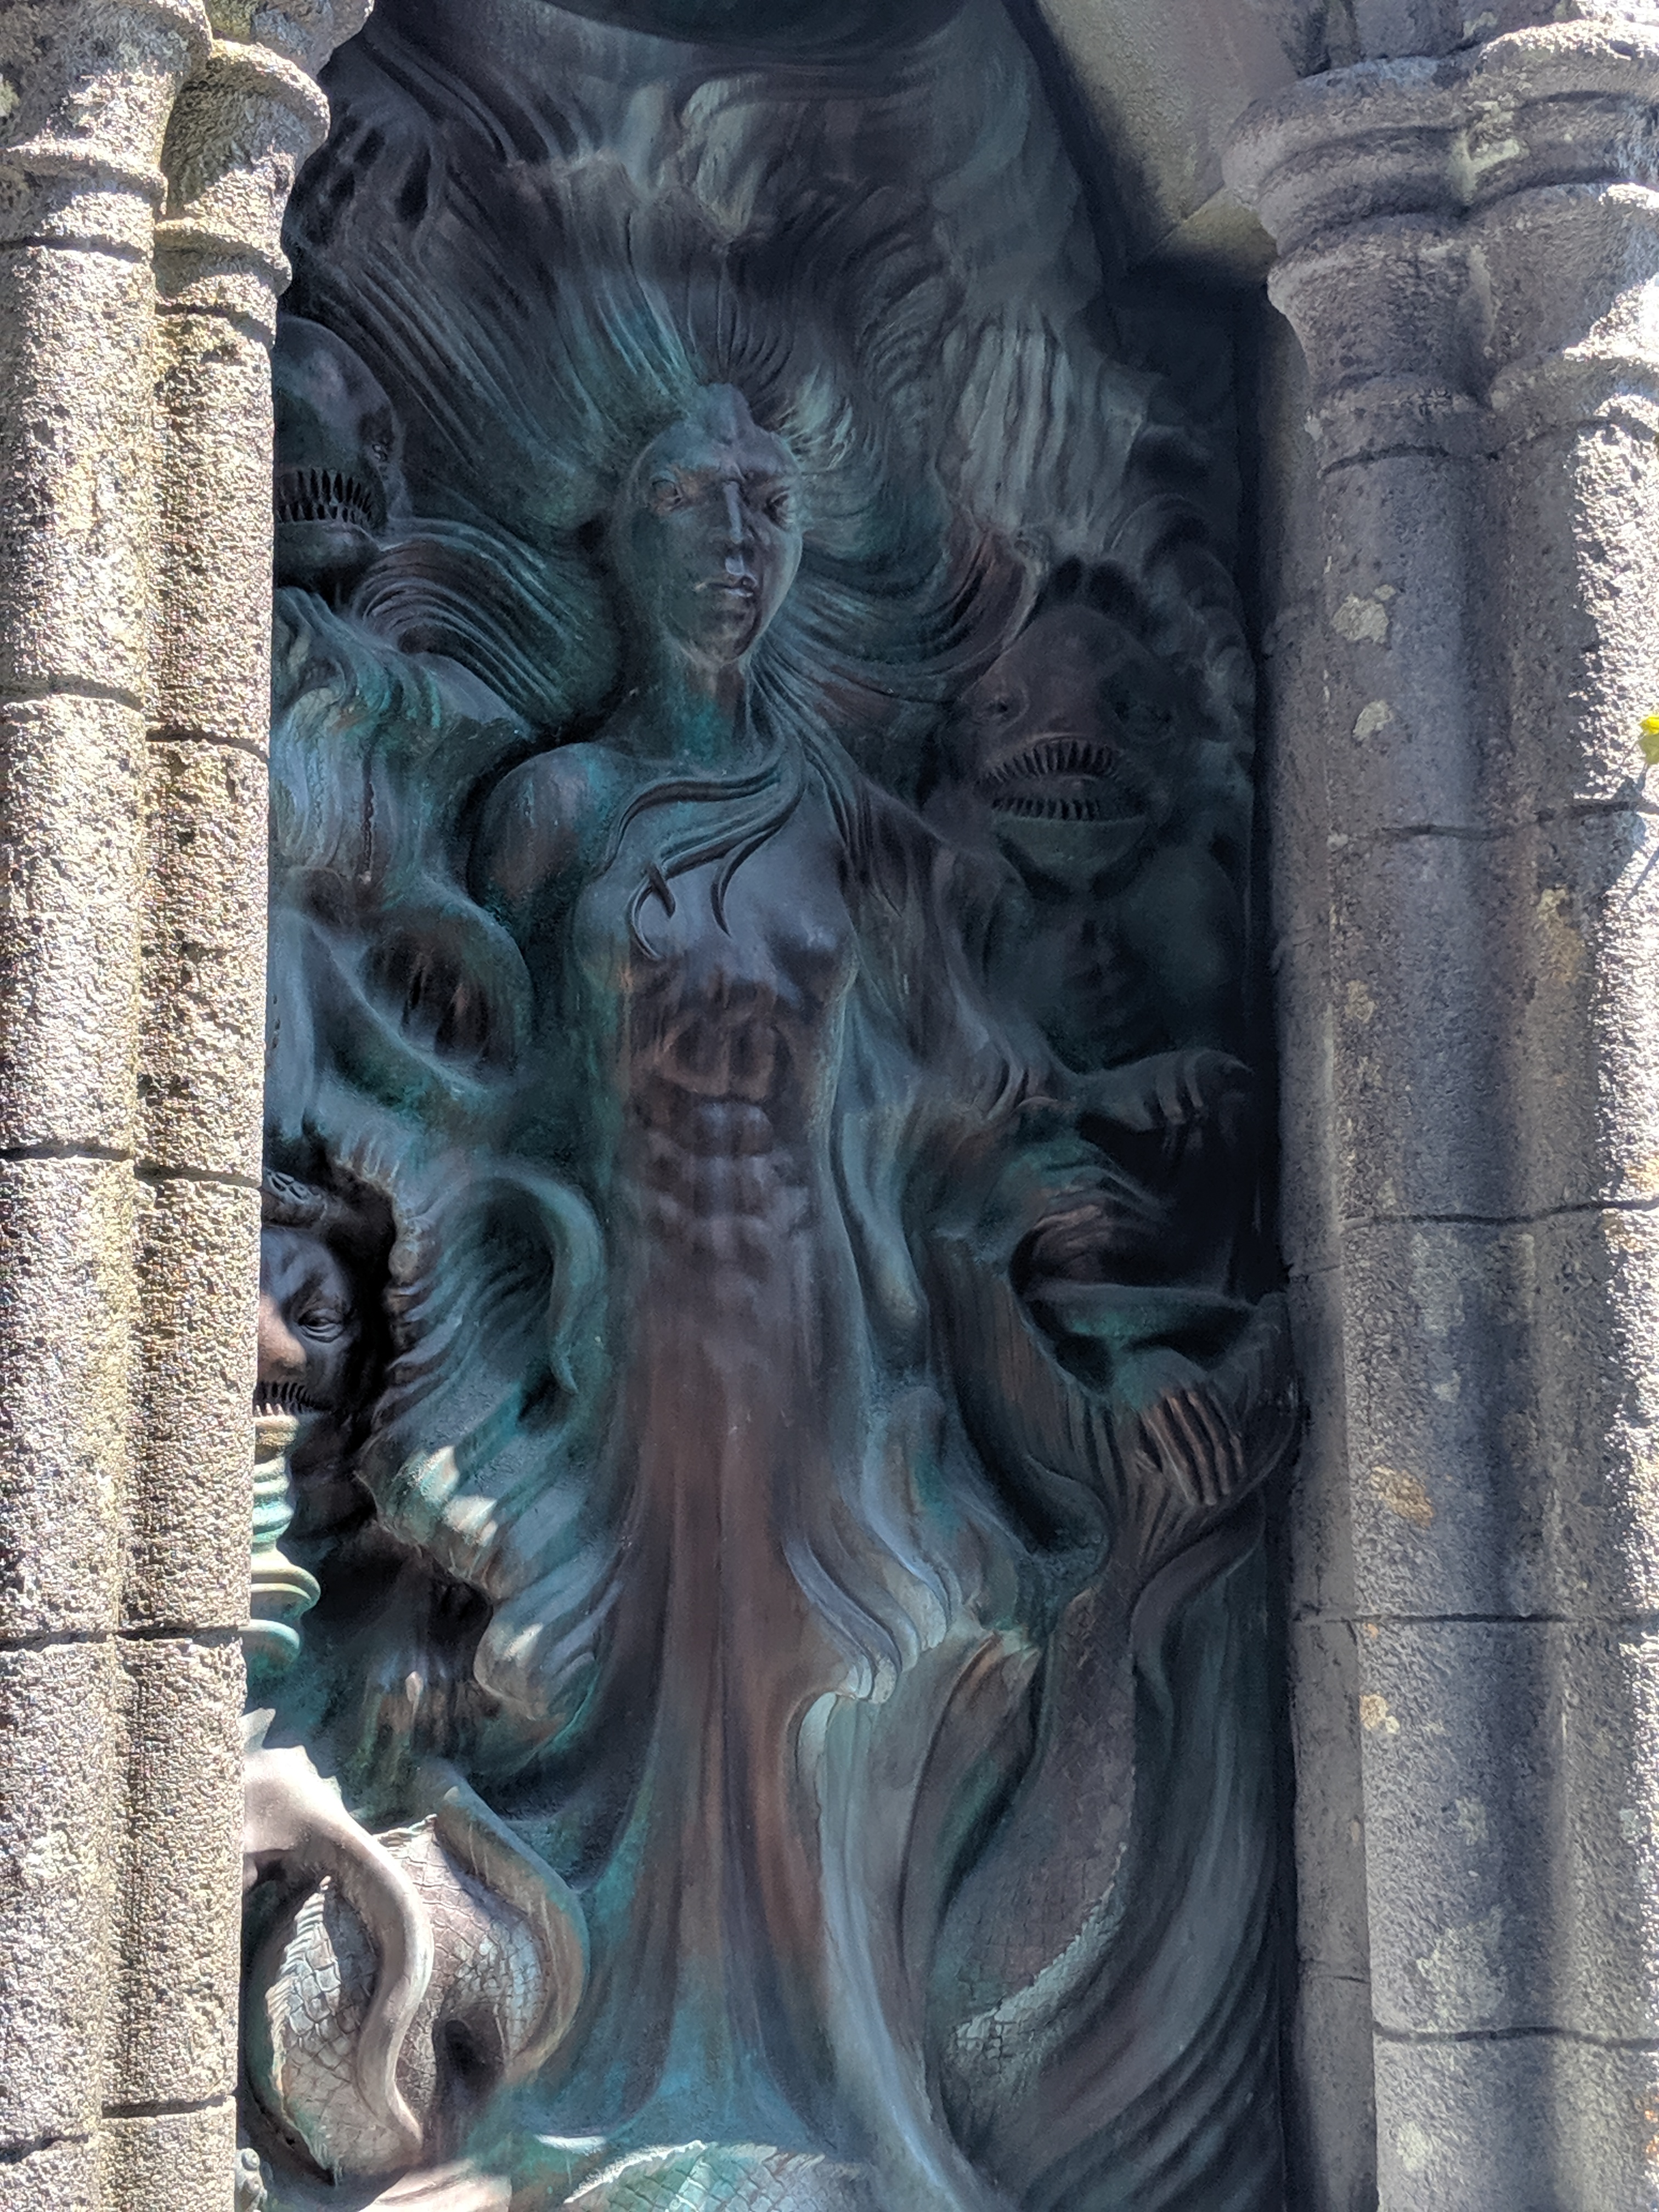 The beautiful image of a merperson greets you before you enter the ruins.